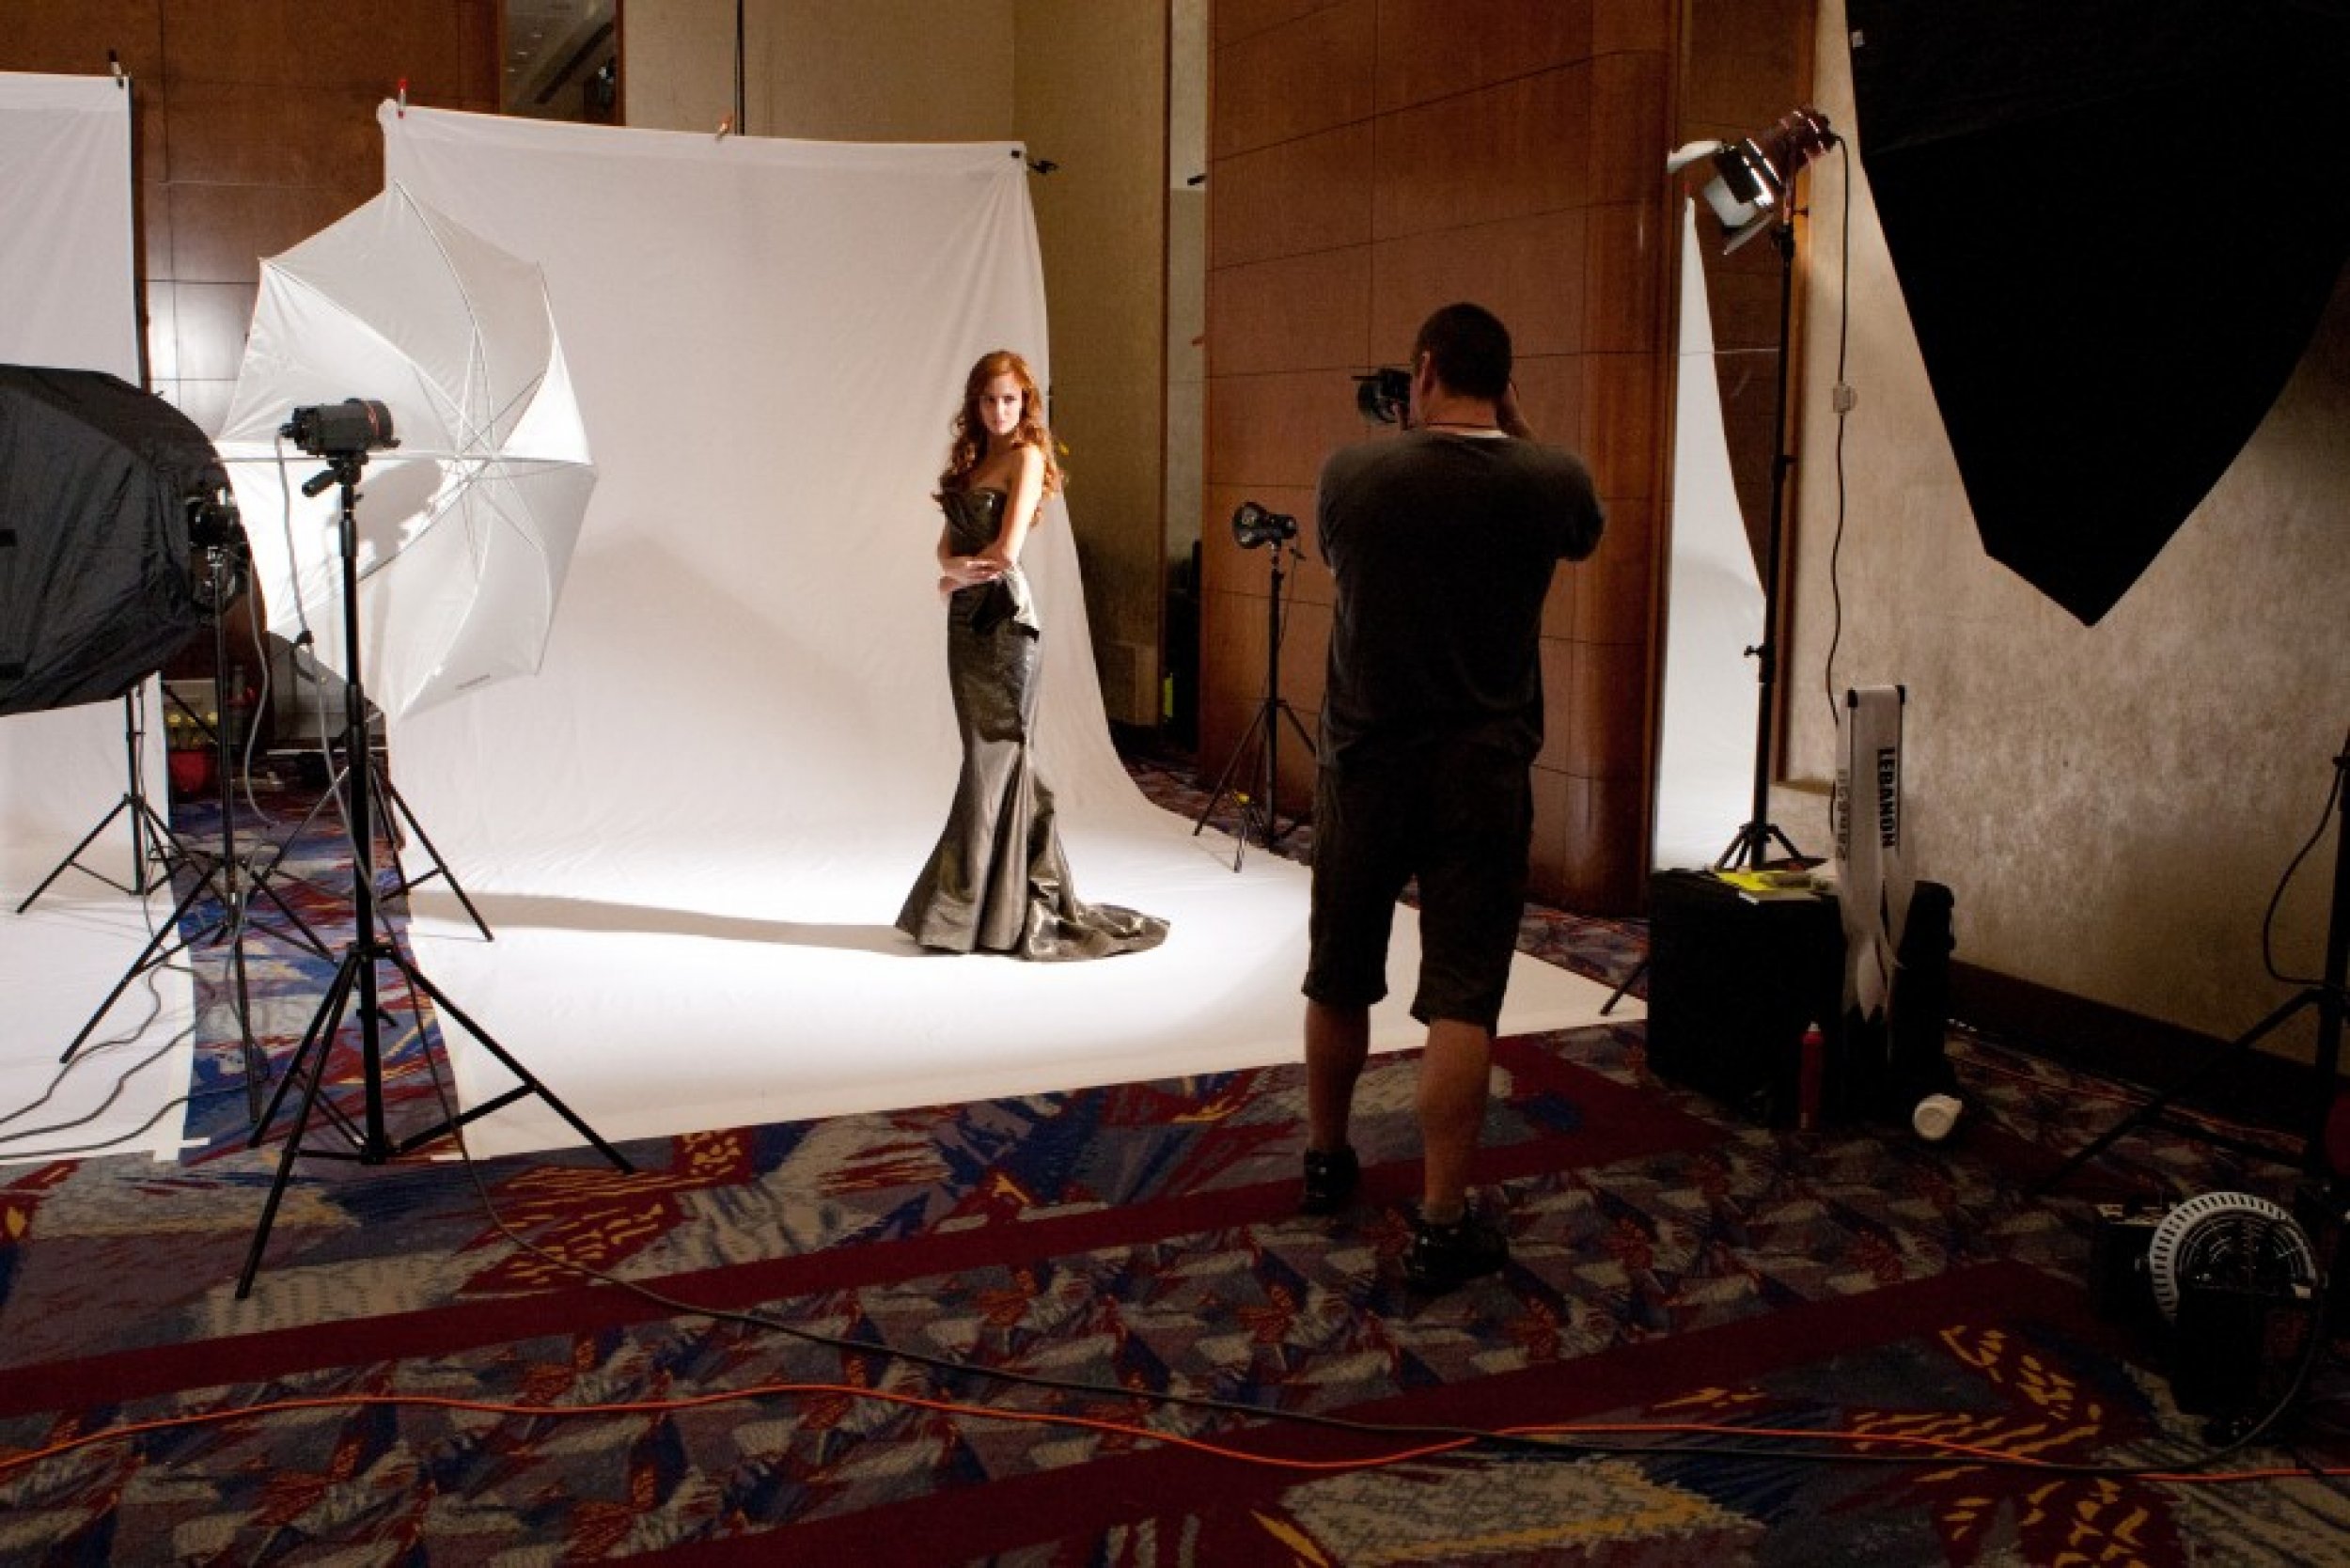 Exclusive Images of Miss U.S.A, Alyssa Campanella, from Miss Universes 2011 Contest .